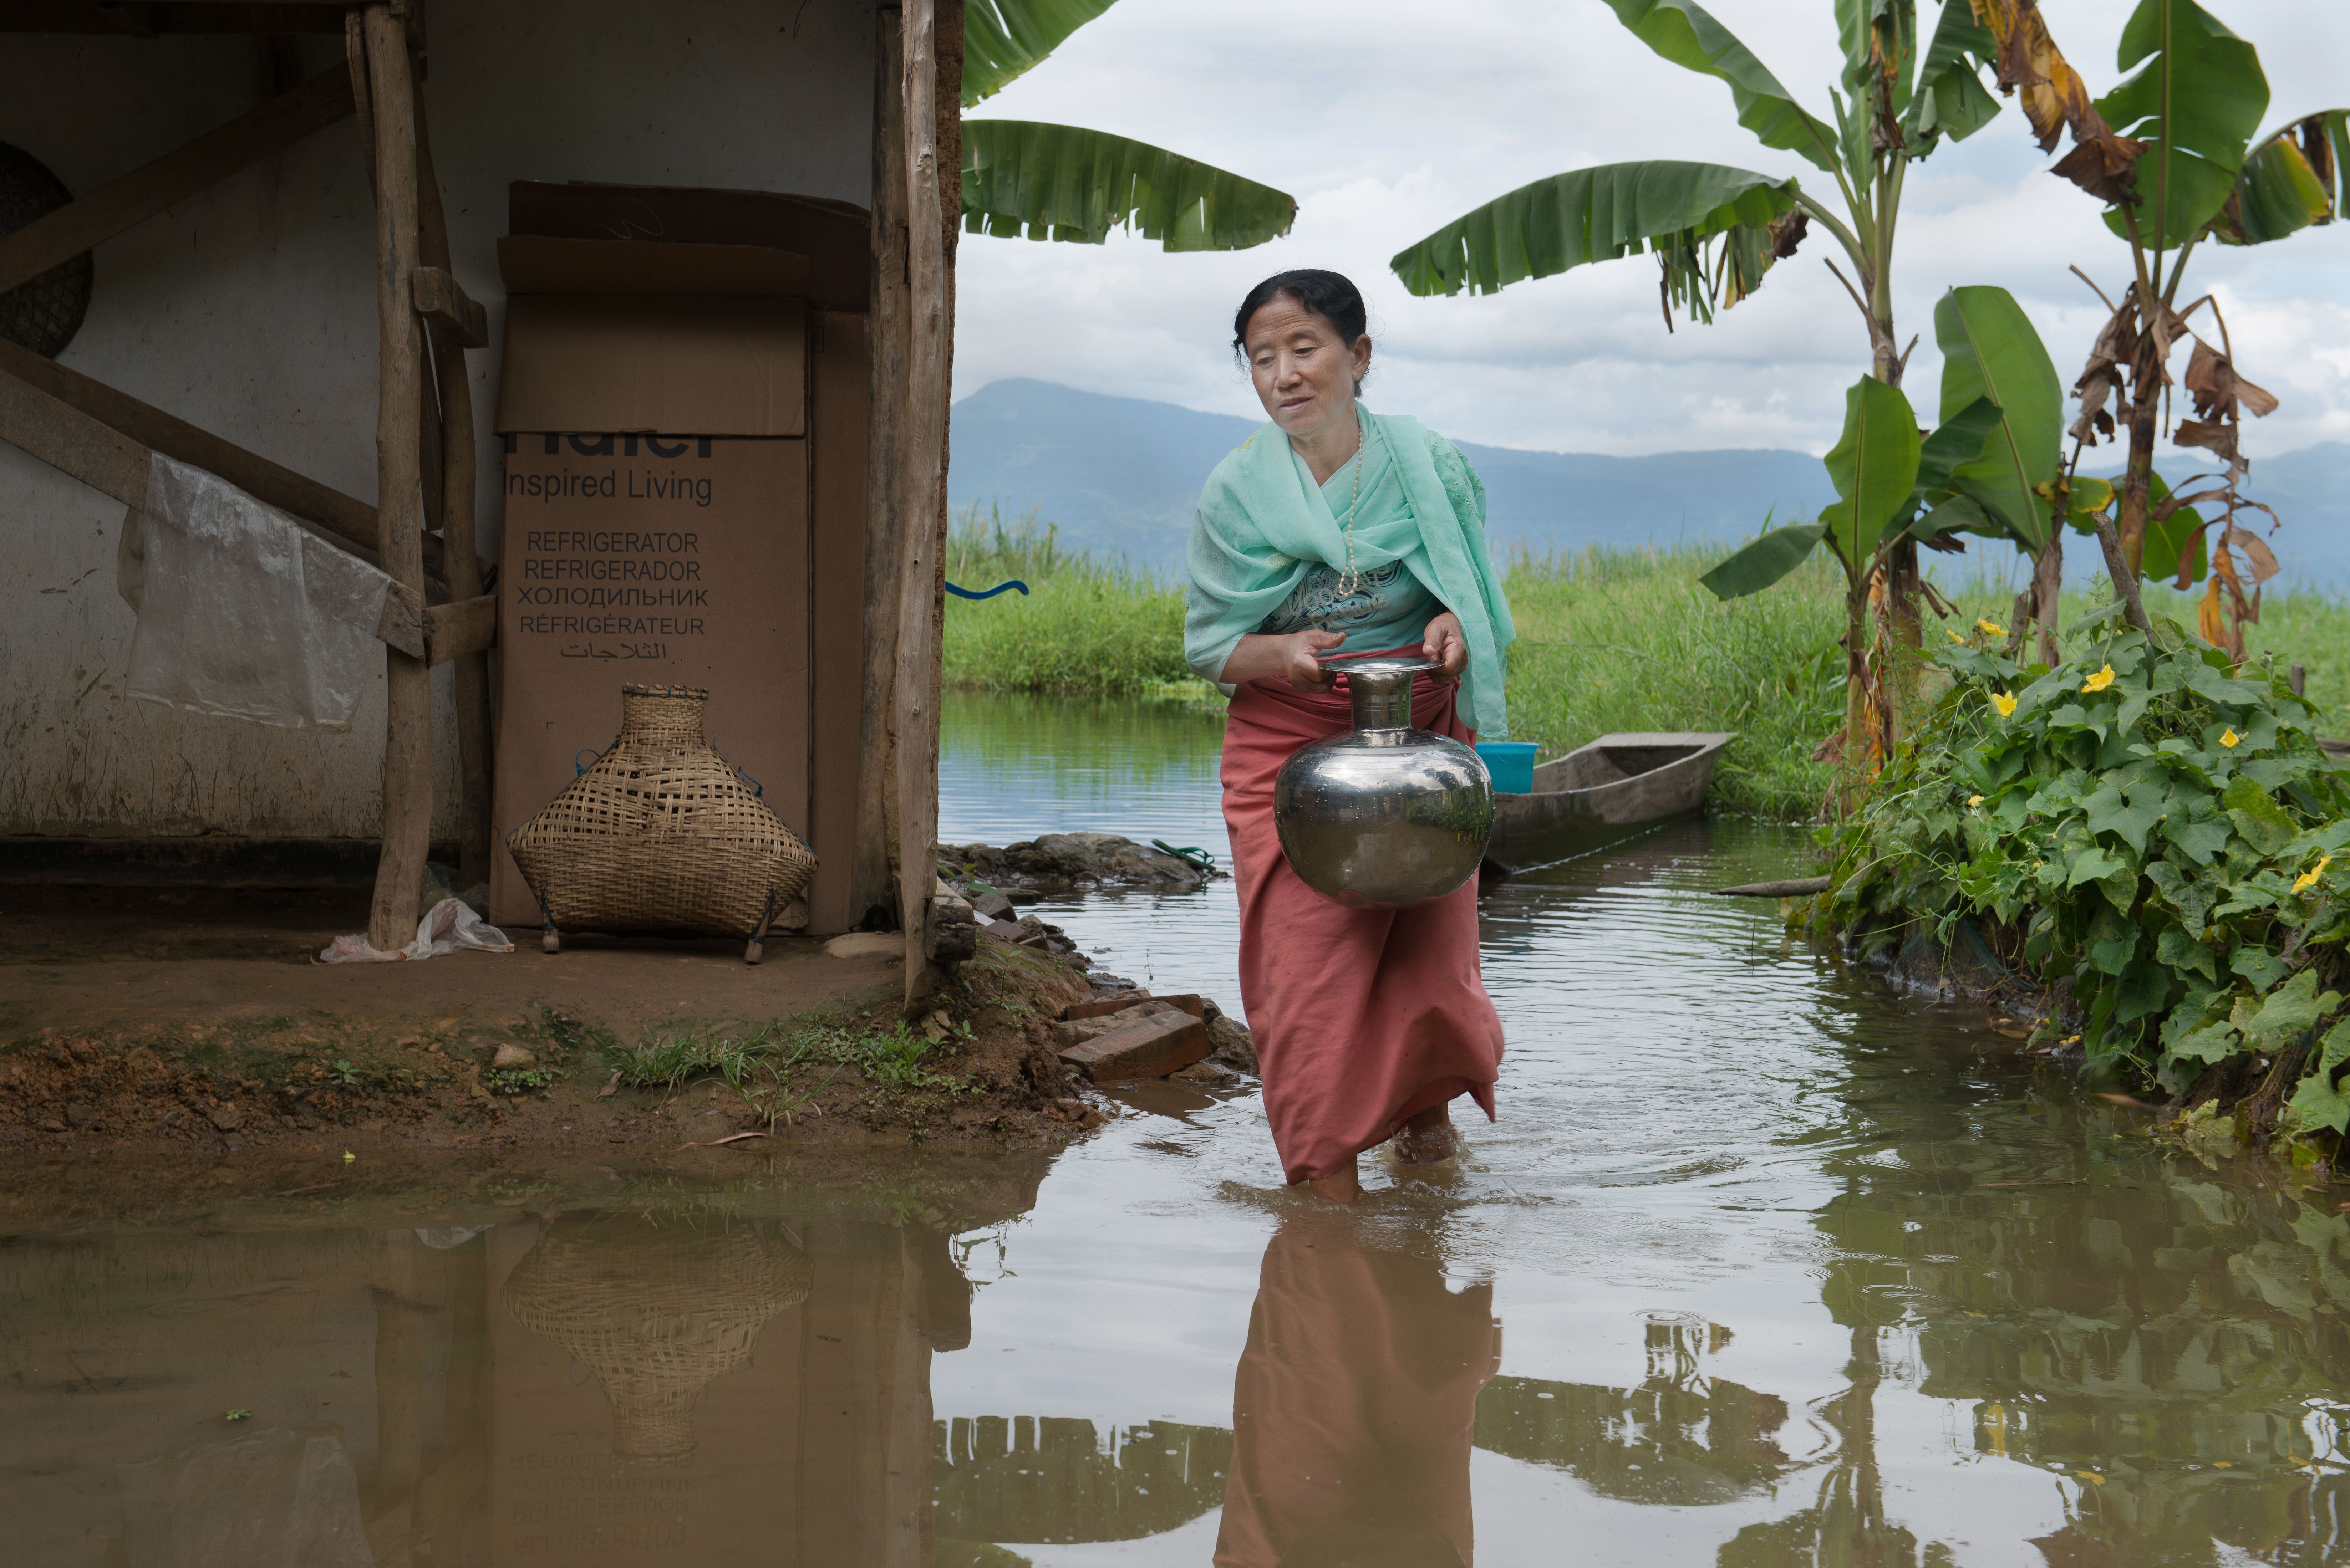 Muktarei Oinam wades through the flooded front yard of her home in the village of Thanga in the Loktak area of Manipur. Image by Neeta Satam. India, 2017.